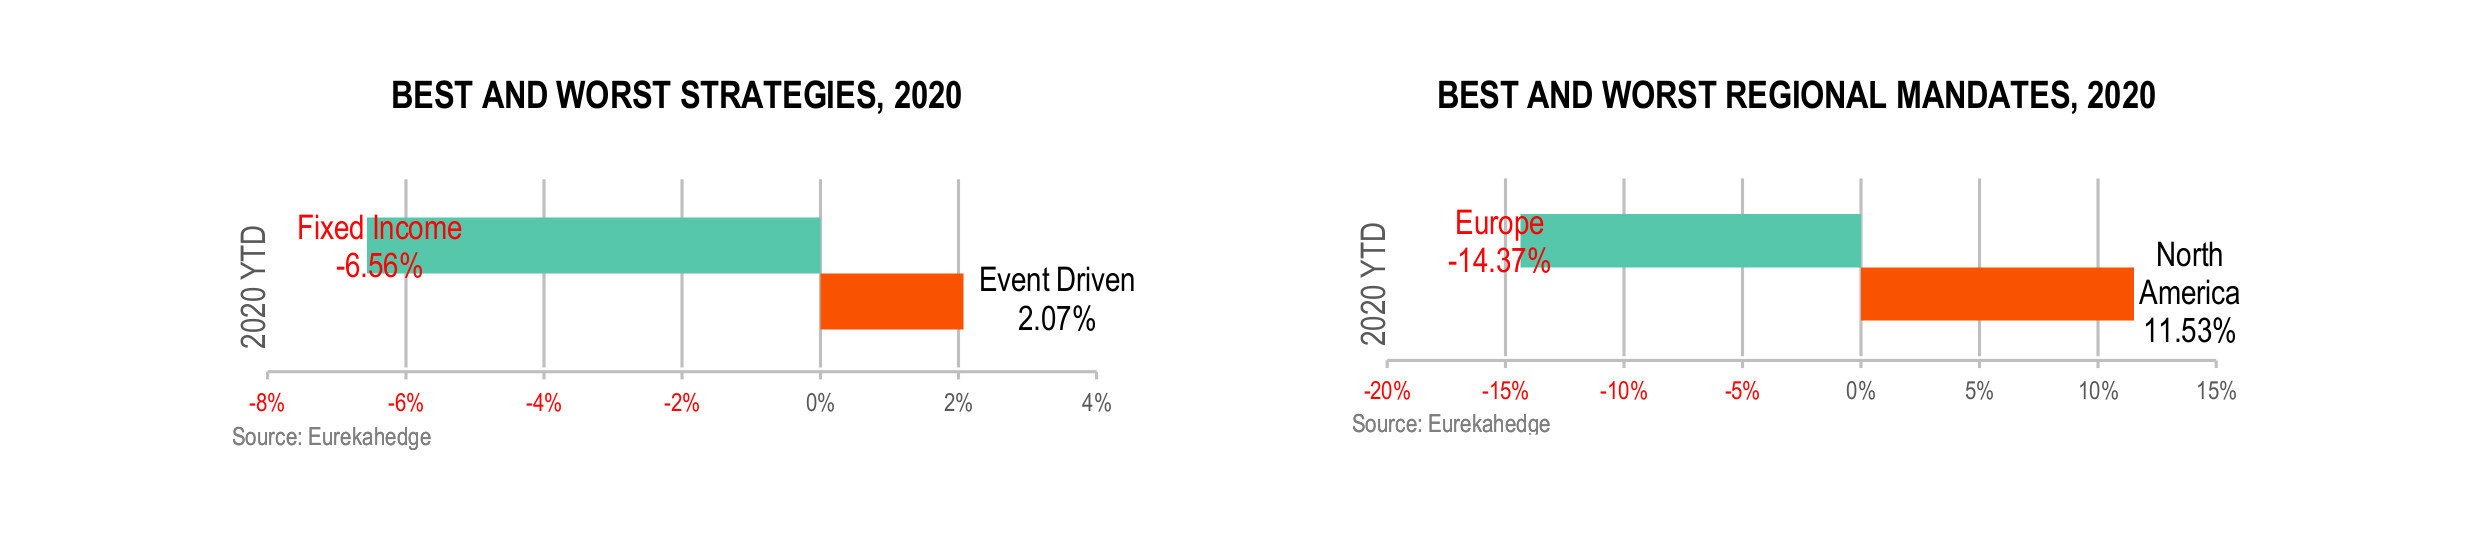 Fund of Hedge Funds Infographic June 2020 - best and worst strategy and regional mandate 2020